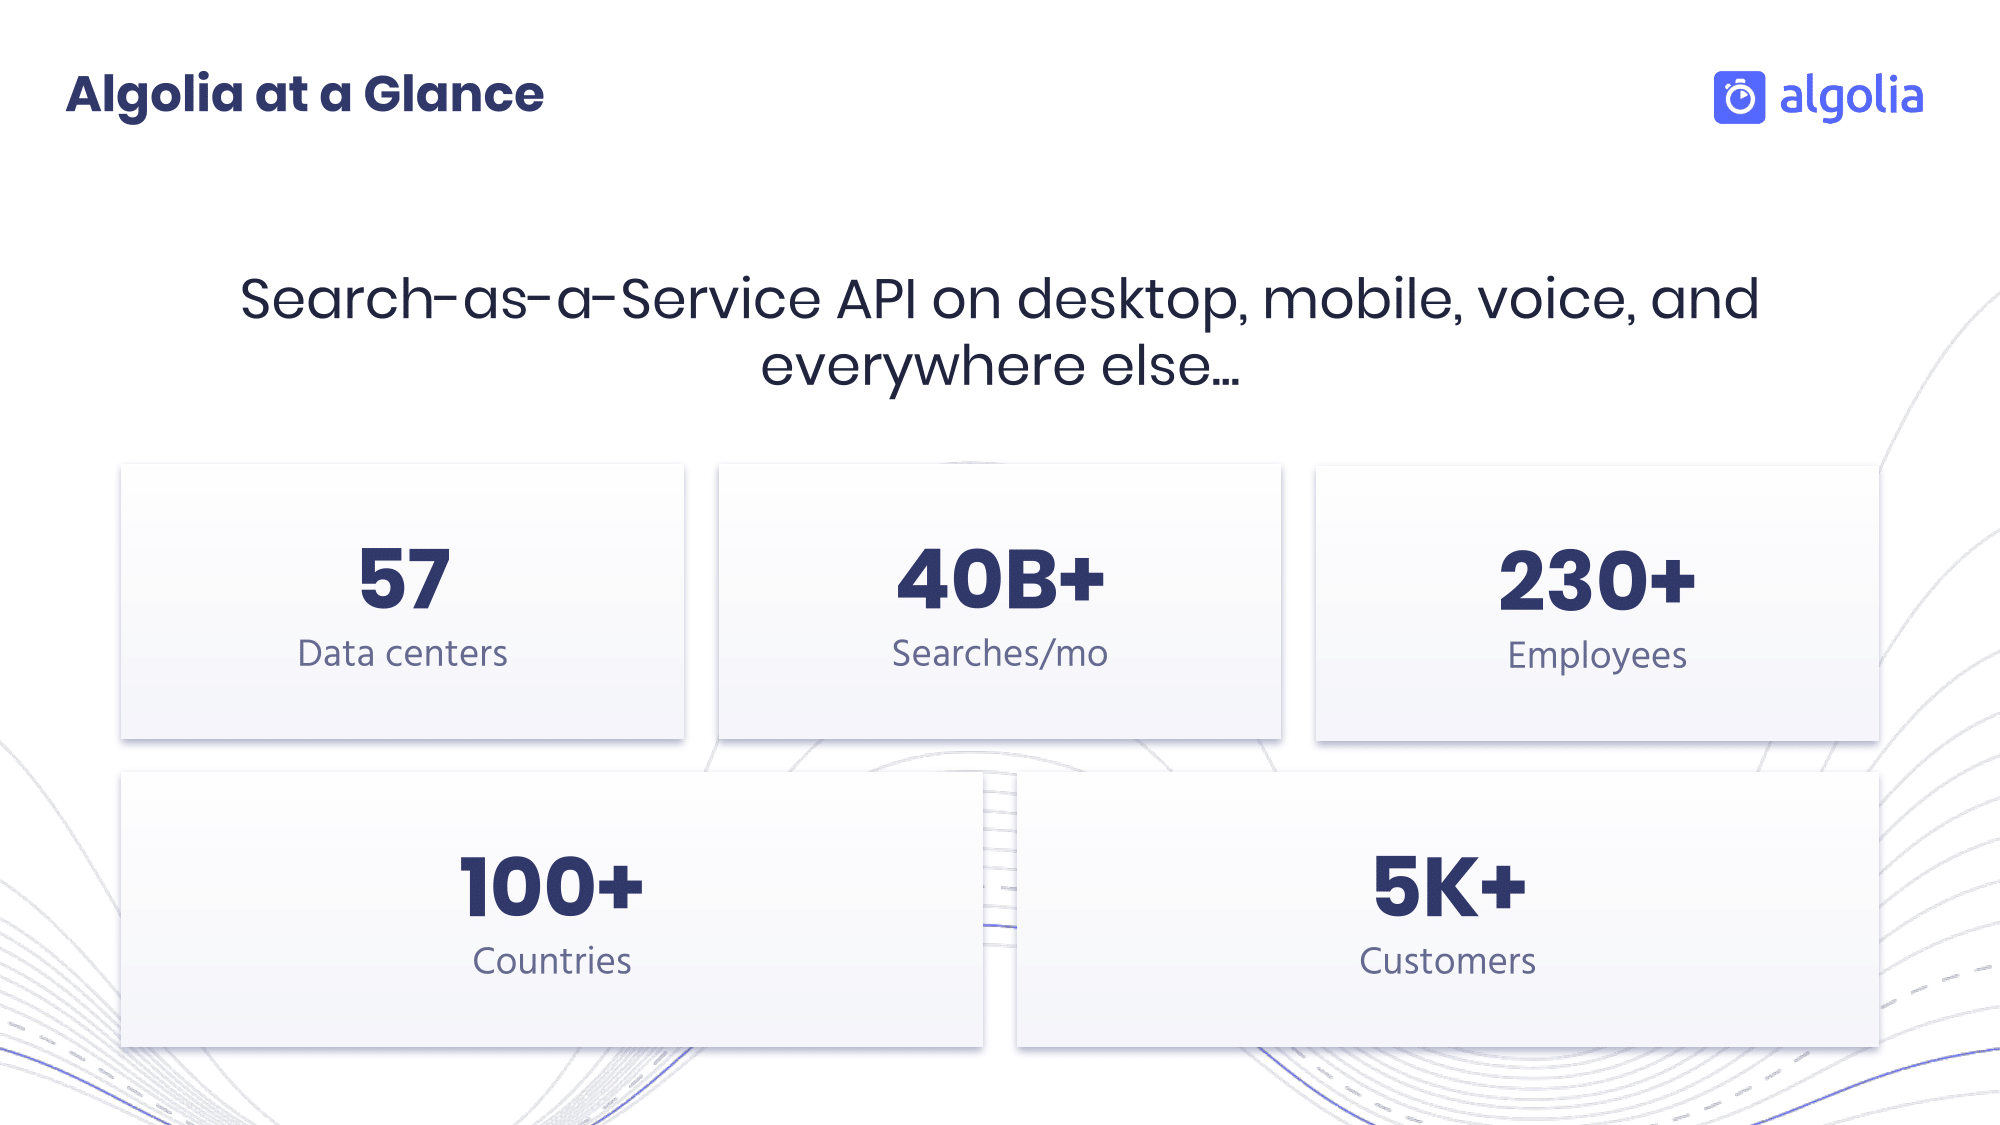 What is Algolia